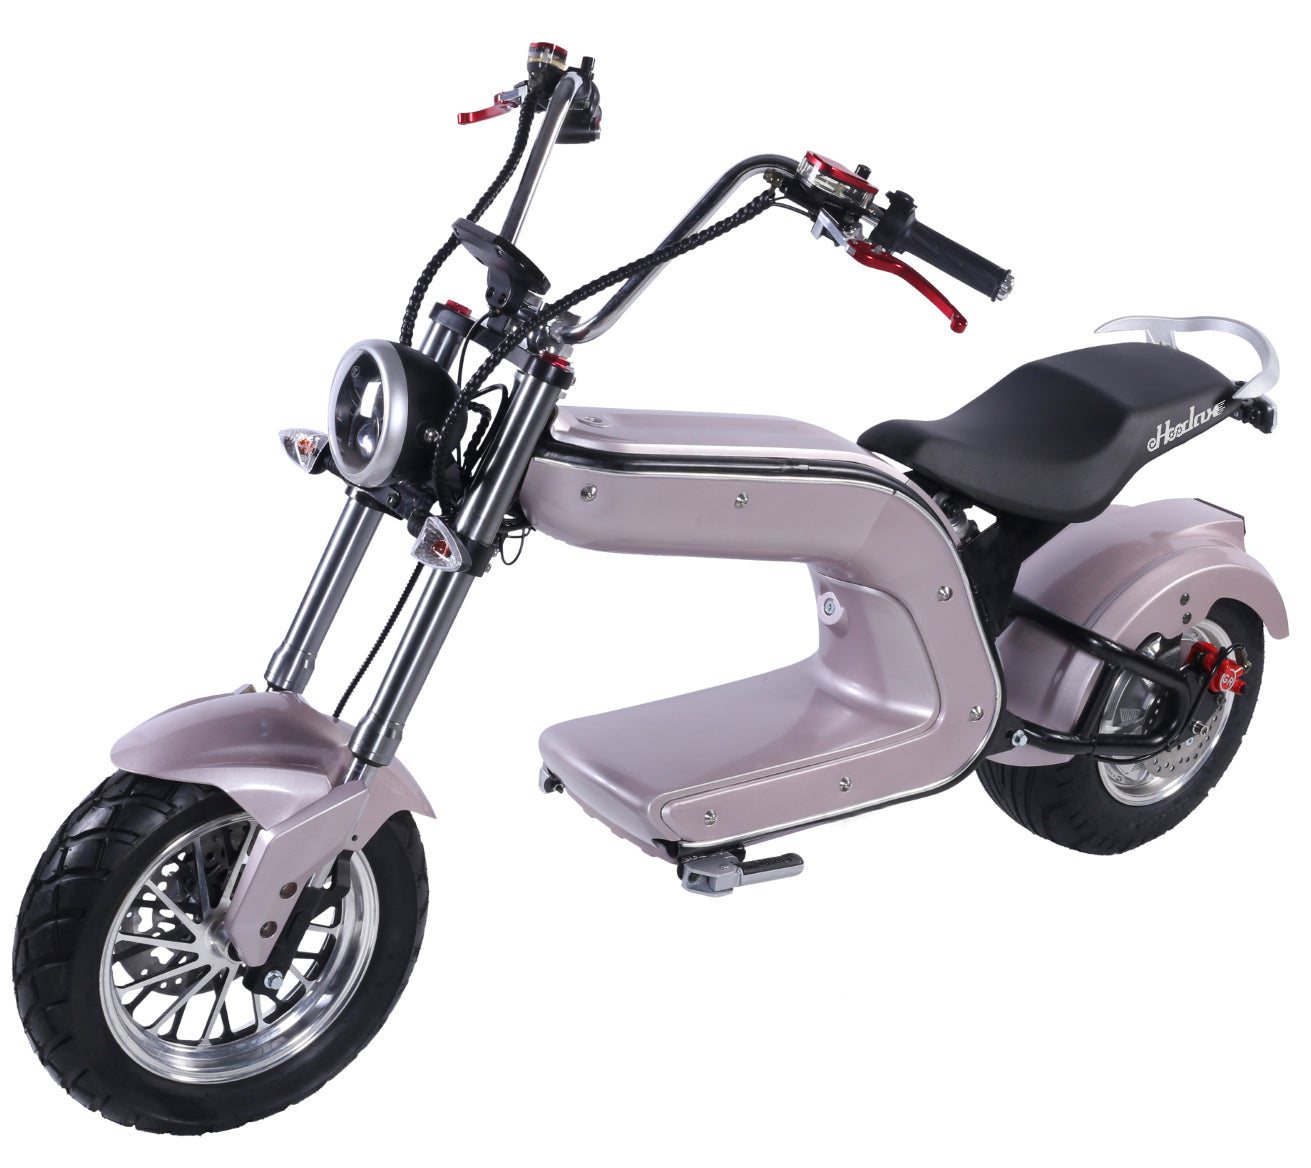 large 2000w/2500w high power two wheels e-moto adult electric scooter motorcycle for sale | Electrr Inc